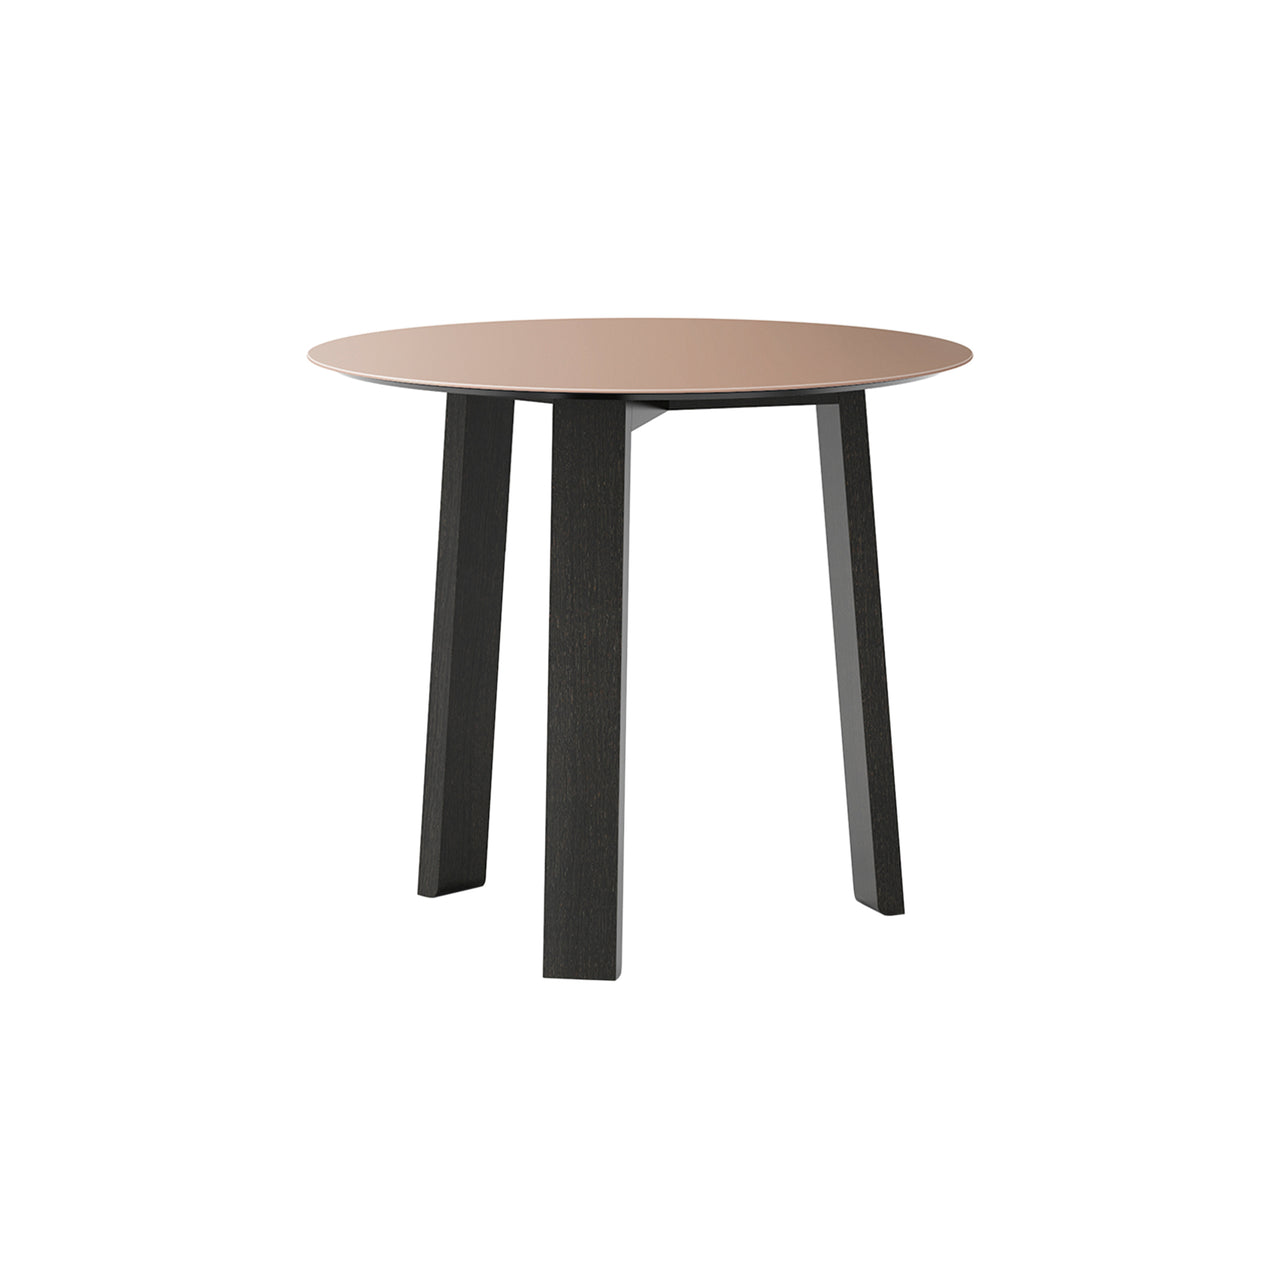 Stockholm Round Side Table: Low + Pale Rose Anodised Aluminum + Dark Grey Stained Oak